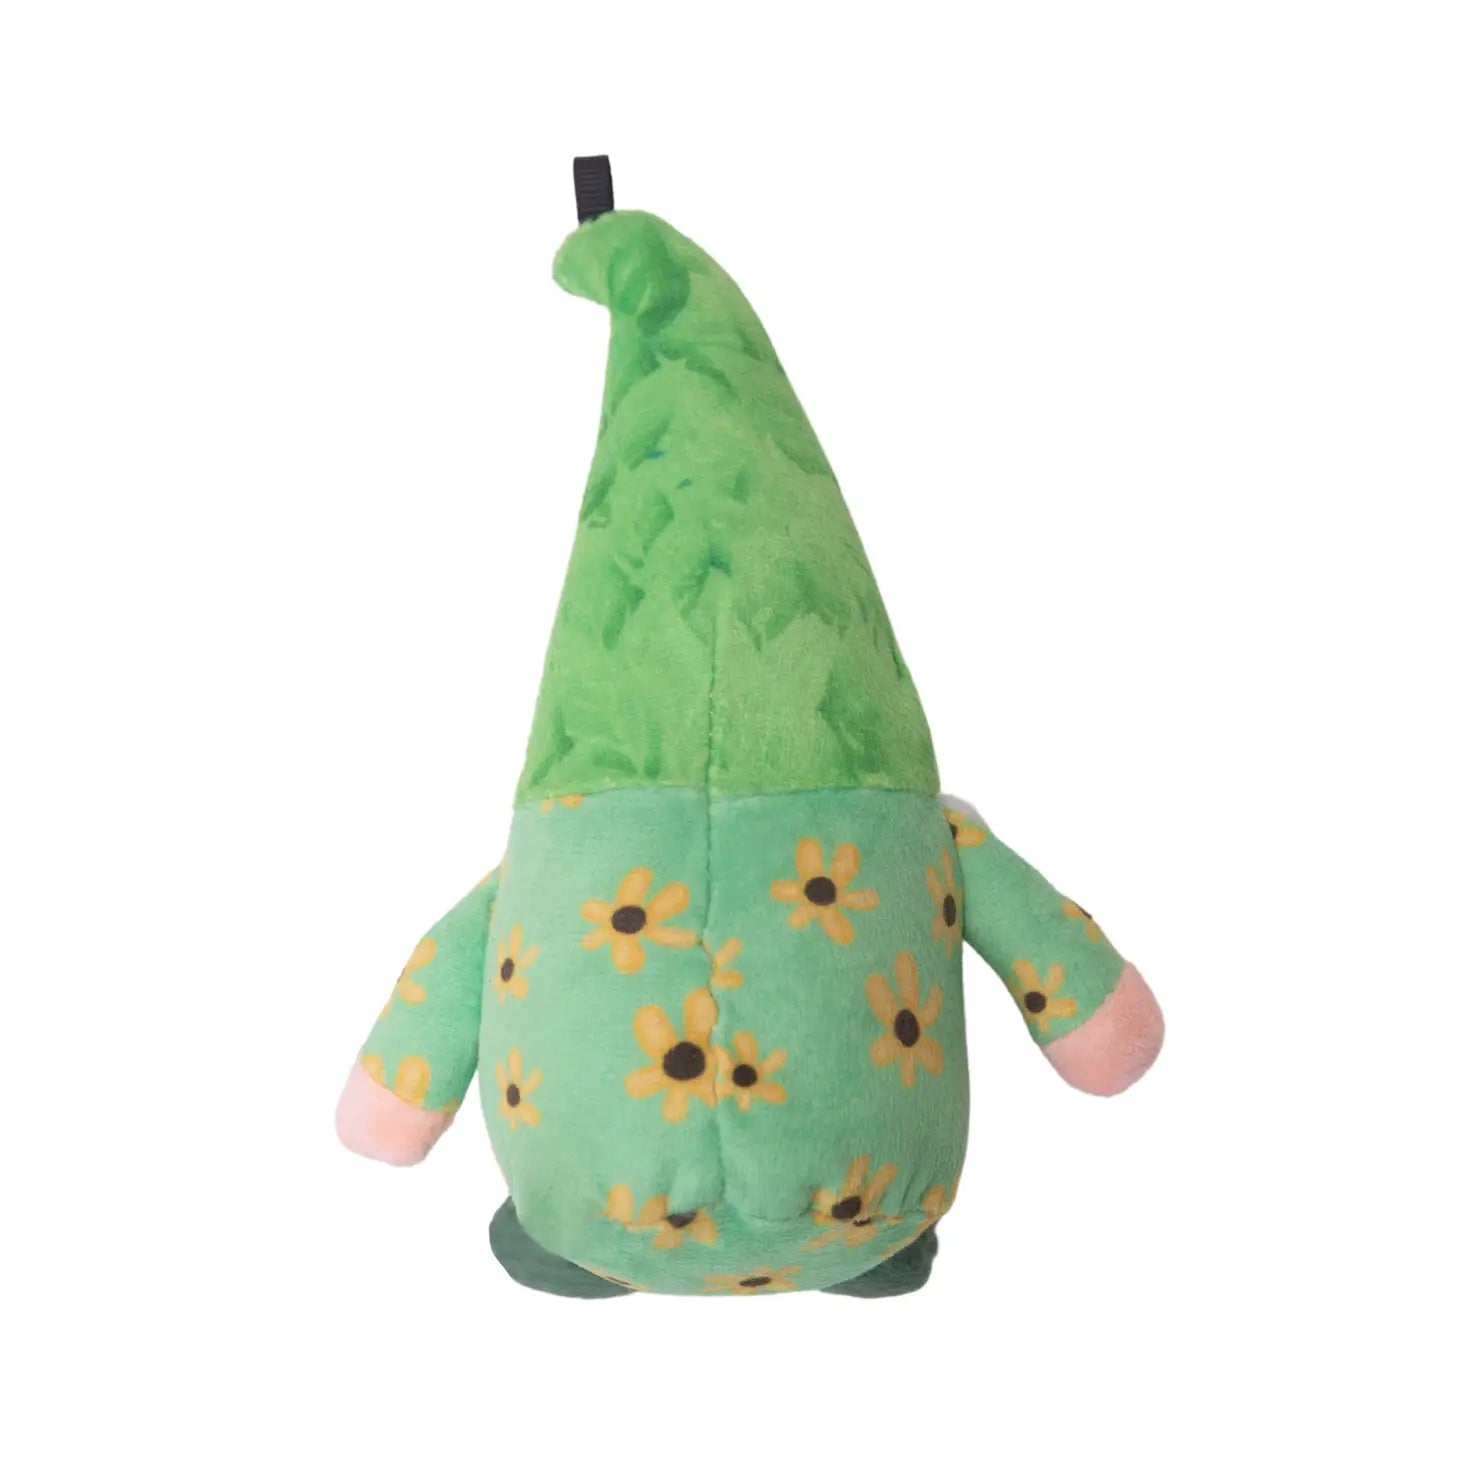 Isolated green gnome with its back facing the camera